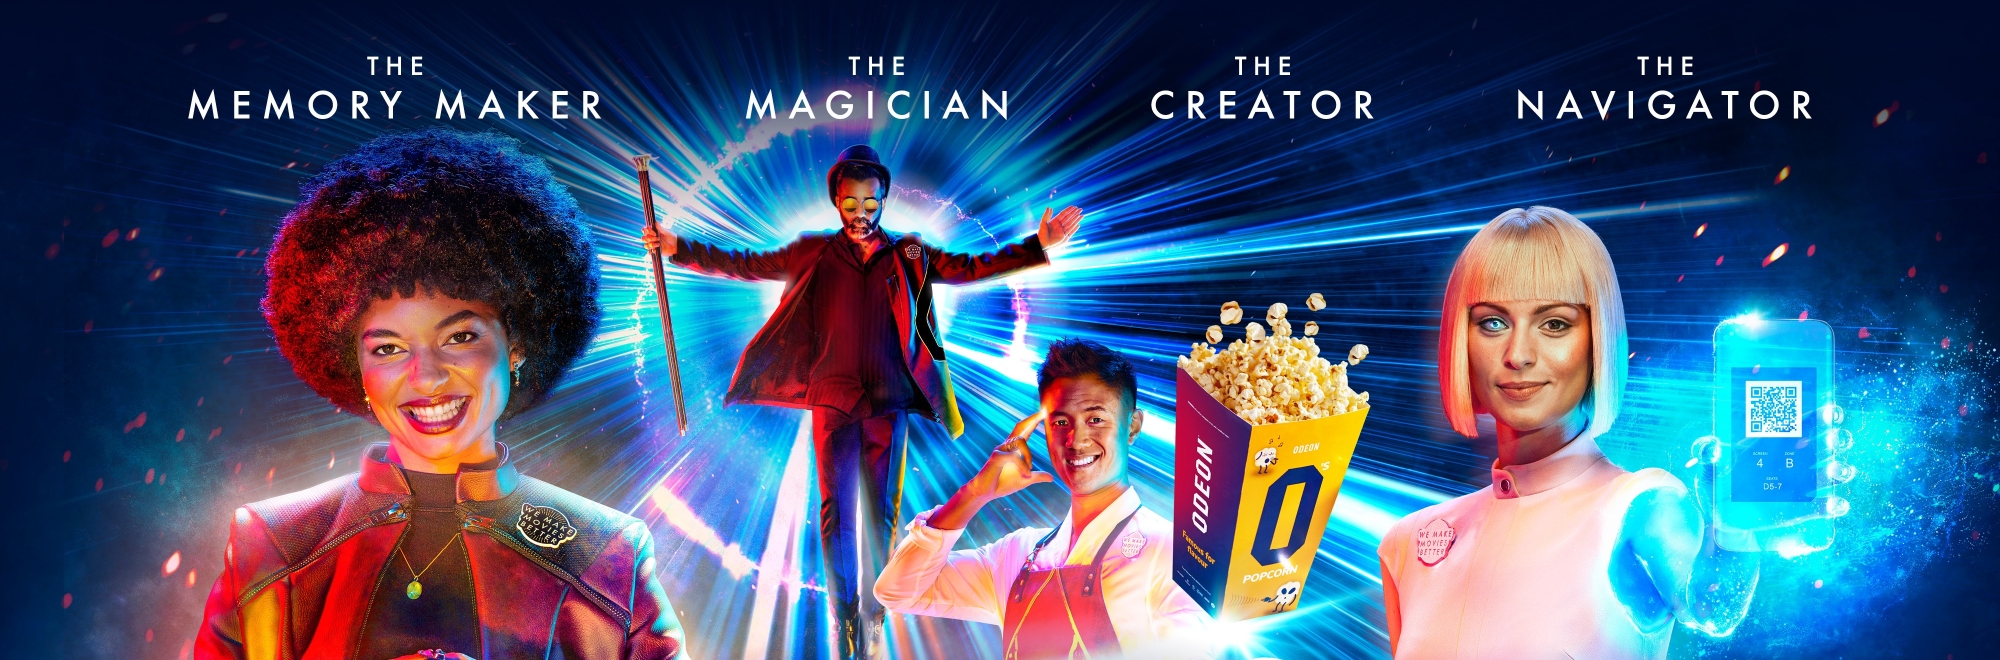 ELVIS makes movies better with a new cast of characters for Odeon Cinemas